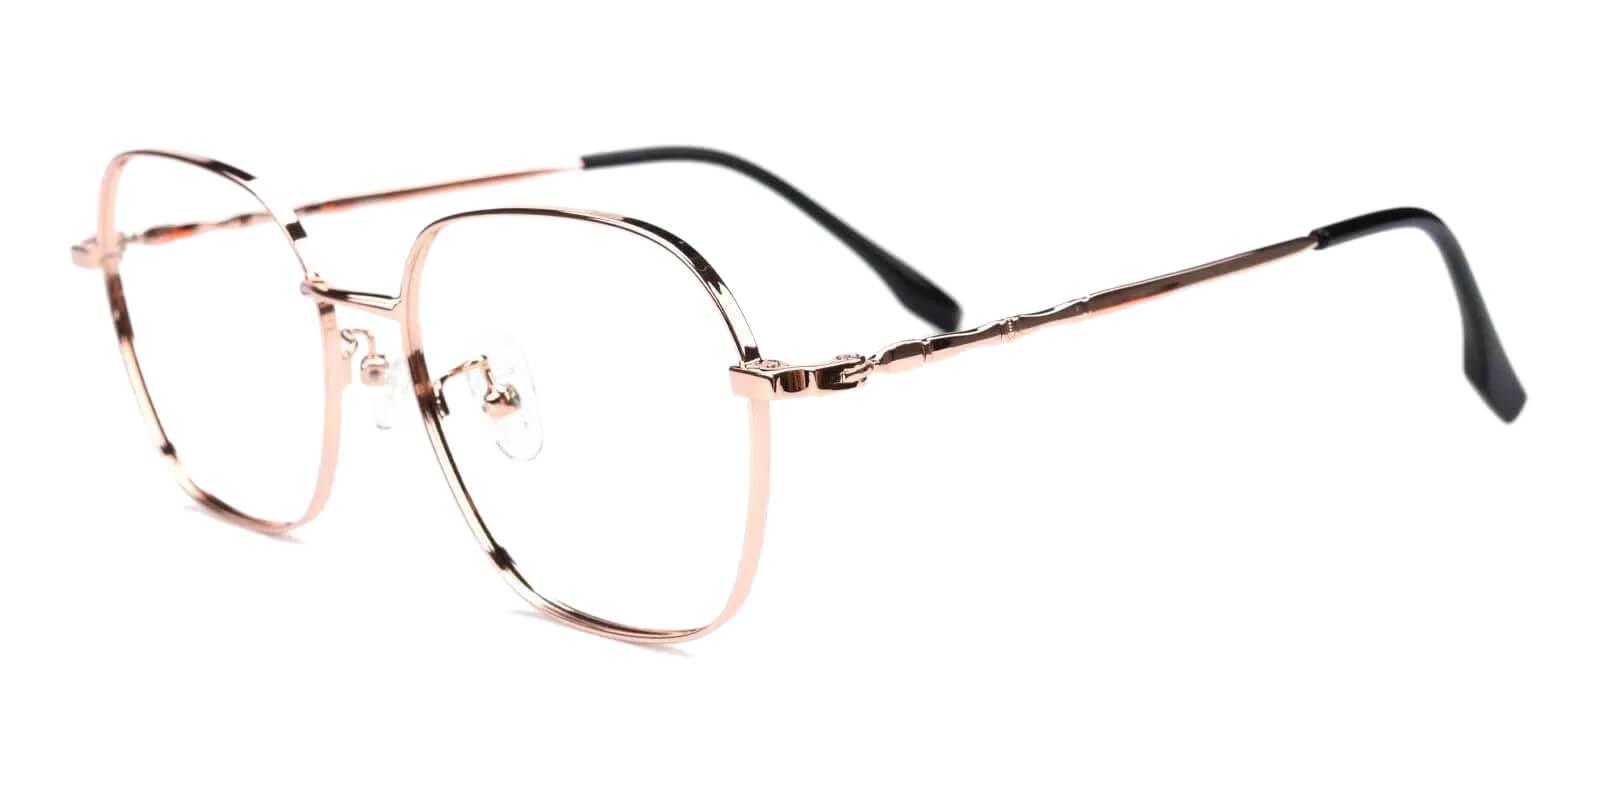 Ruff Gold Metal Eyeglasses , Fashion , NosePads Frames from ABBE Glasses